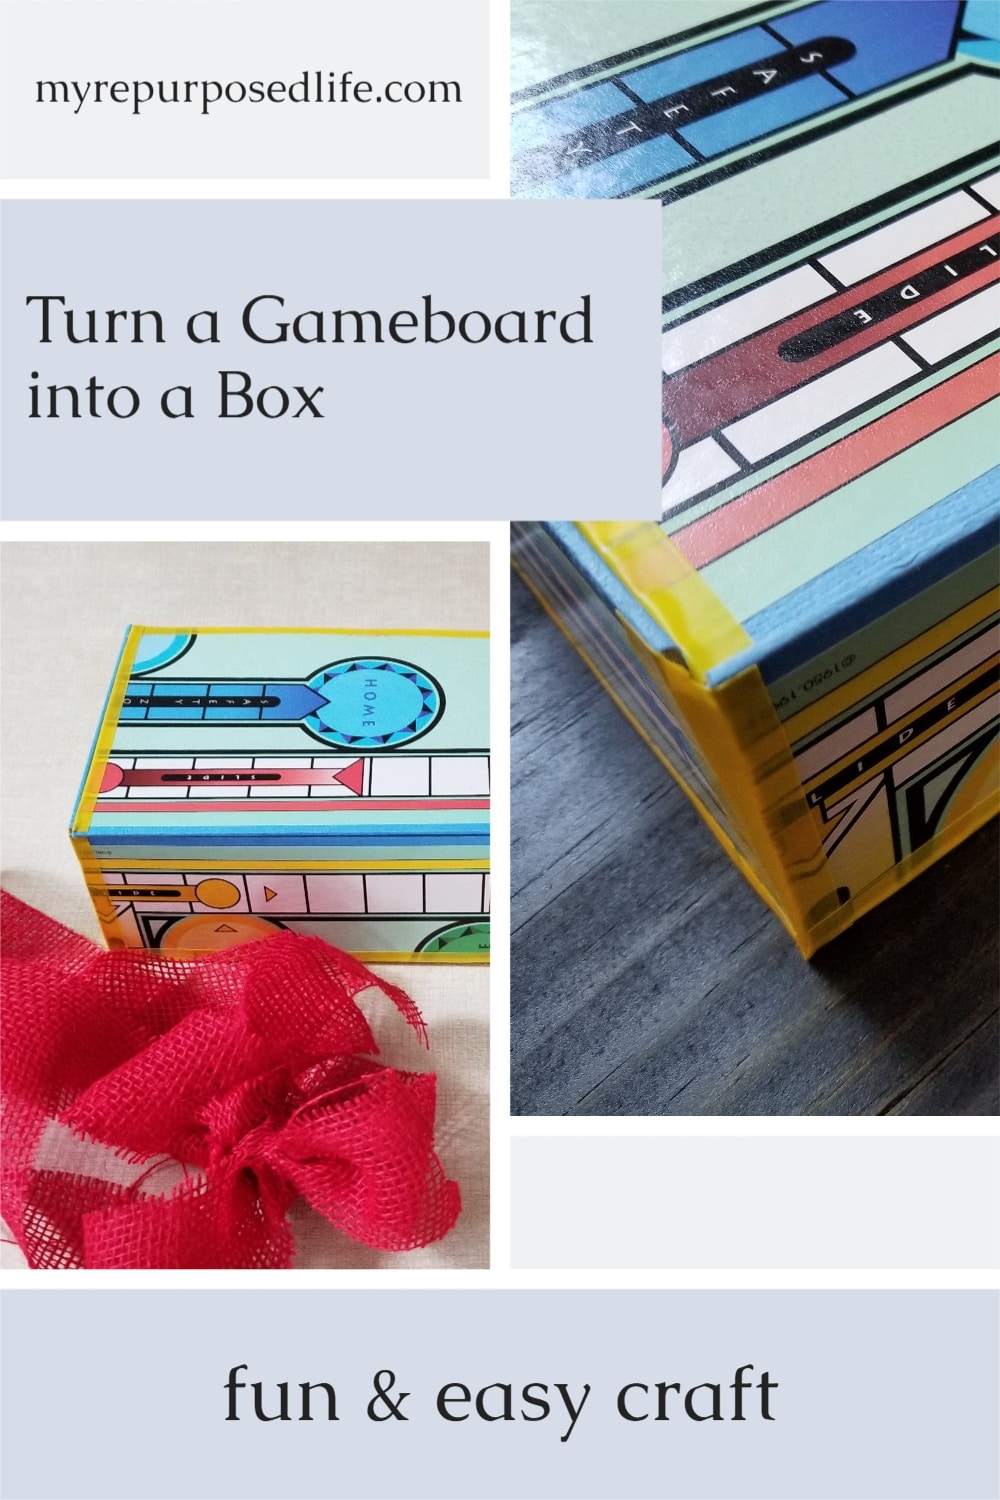 How to make a repurposed Sorry game board box. This small box is perfect for trinkets and treasures. This game board box was used as a colorful gift box for a customized hammer. Make your own game board gift box this weekend. #MyRepurposedLife #repurposed #gameboard #trinket #box via @repurposedlife